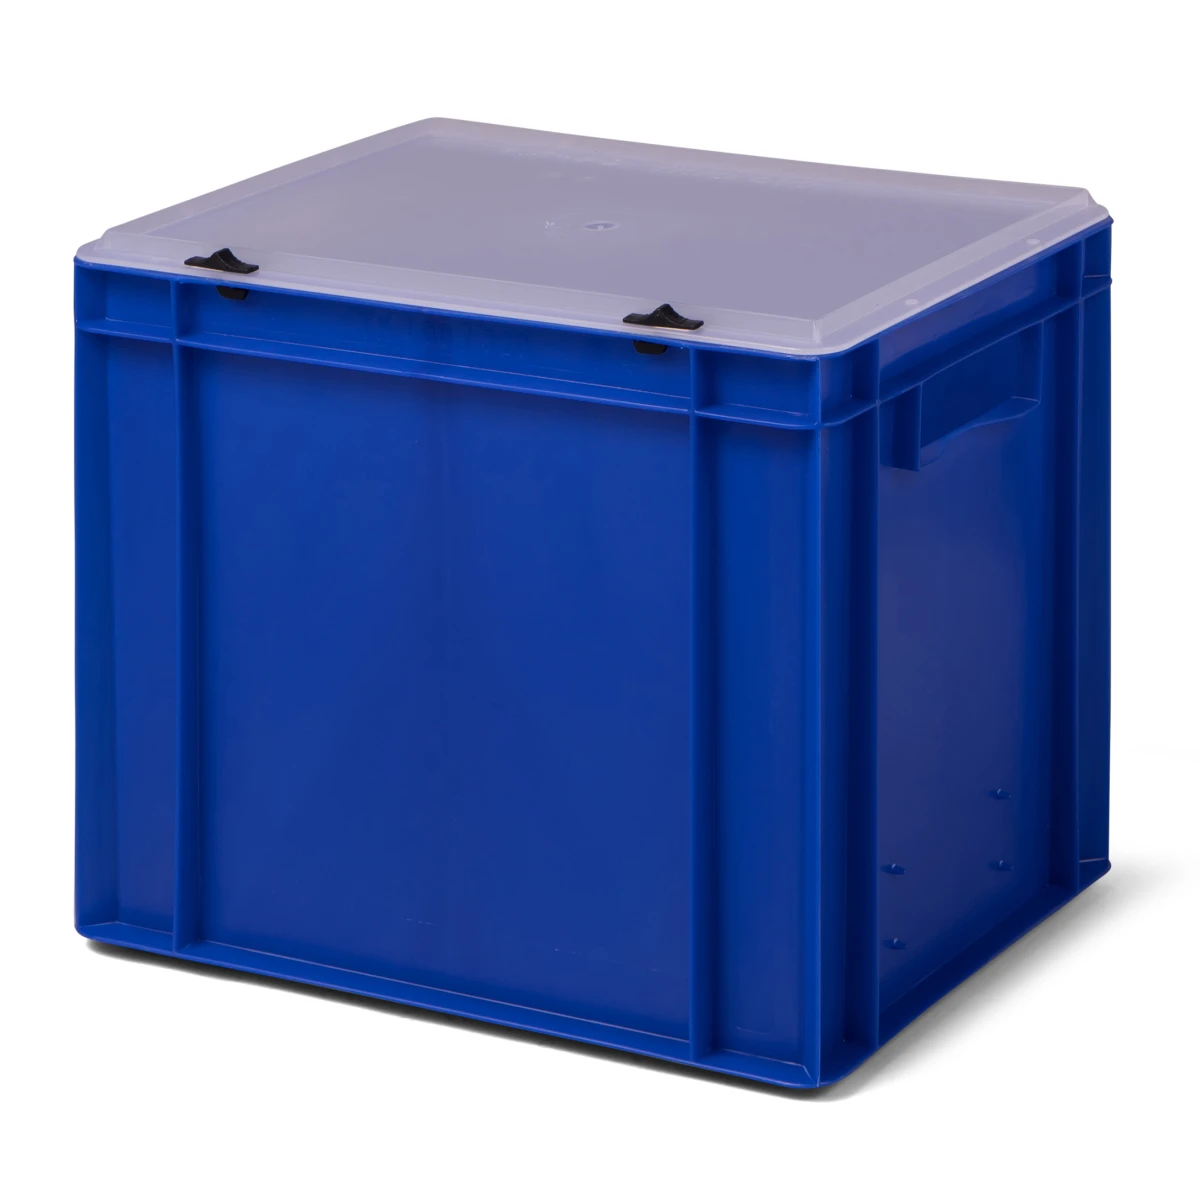 Euro transport stacking box K-TK 400/320-t, 400x300x320/331 mm (LxWxH), with lid, (various colours), 29 liters, made of PP